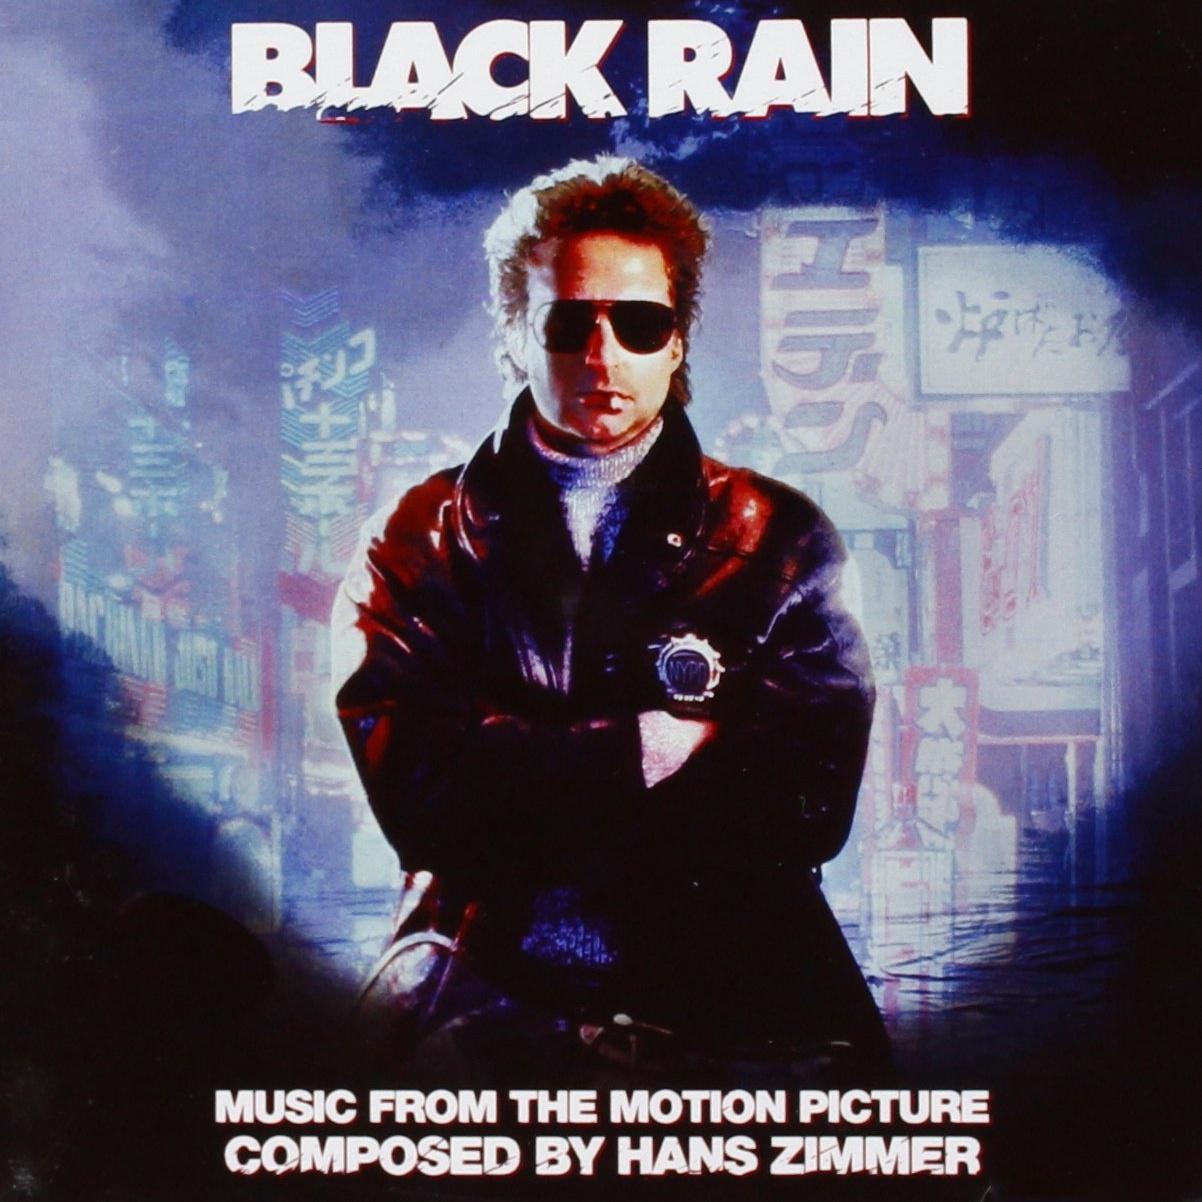 Black Rain: Limited Edition (Music from the Motion Picture)